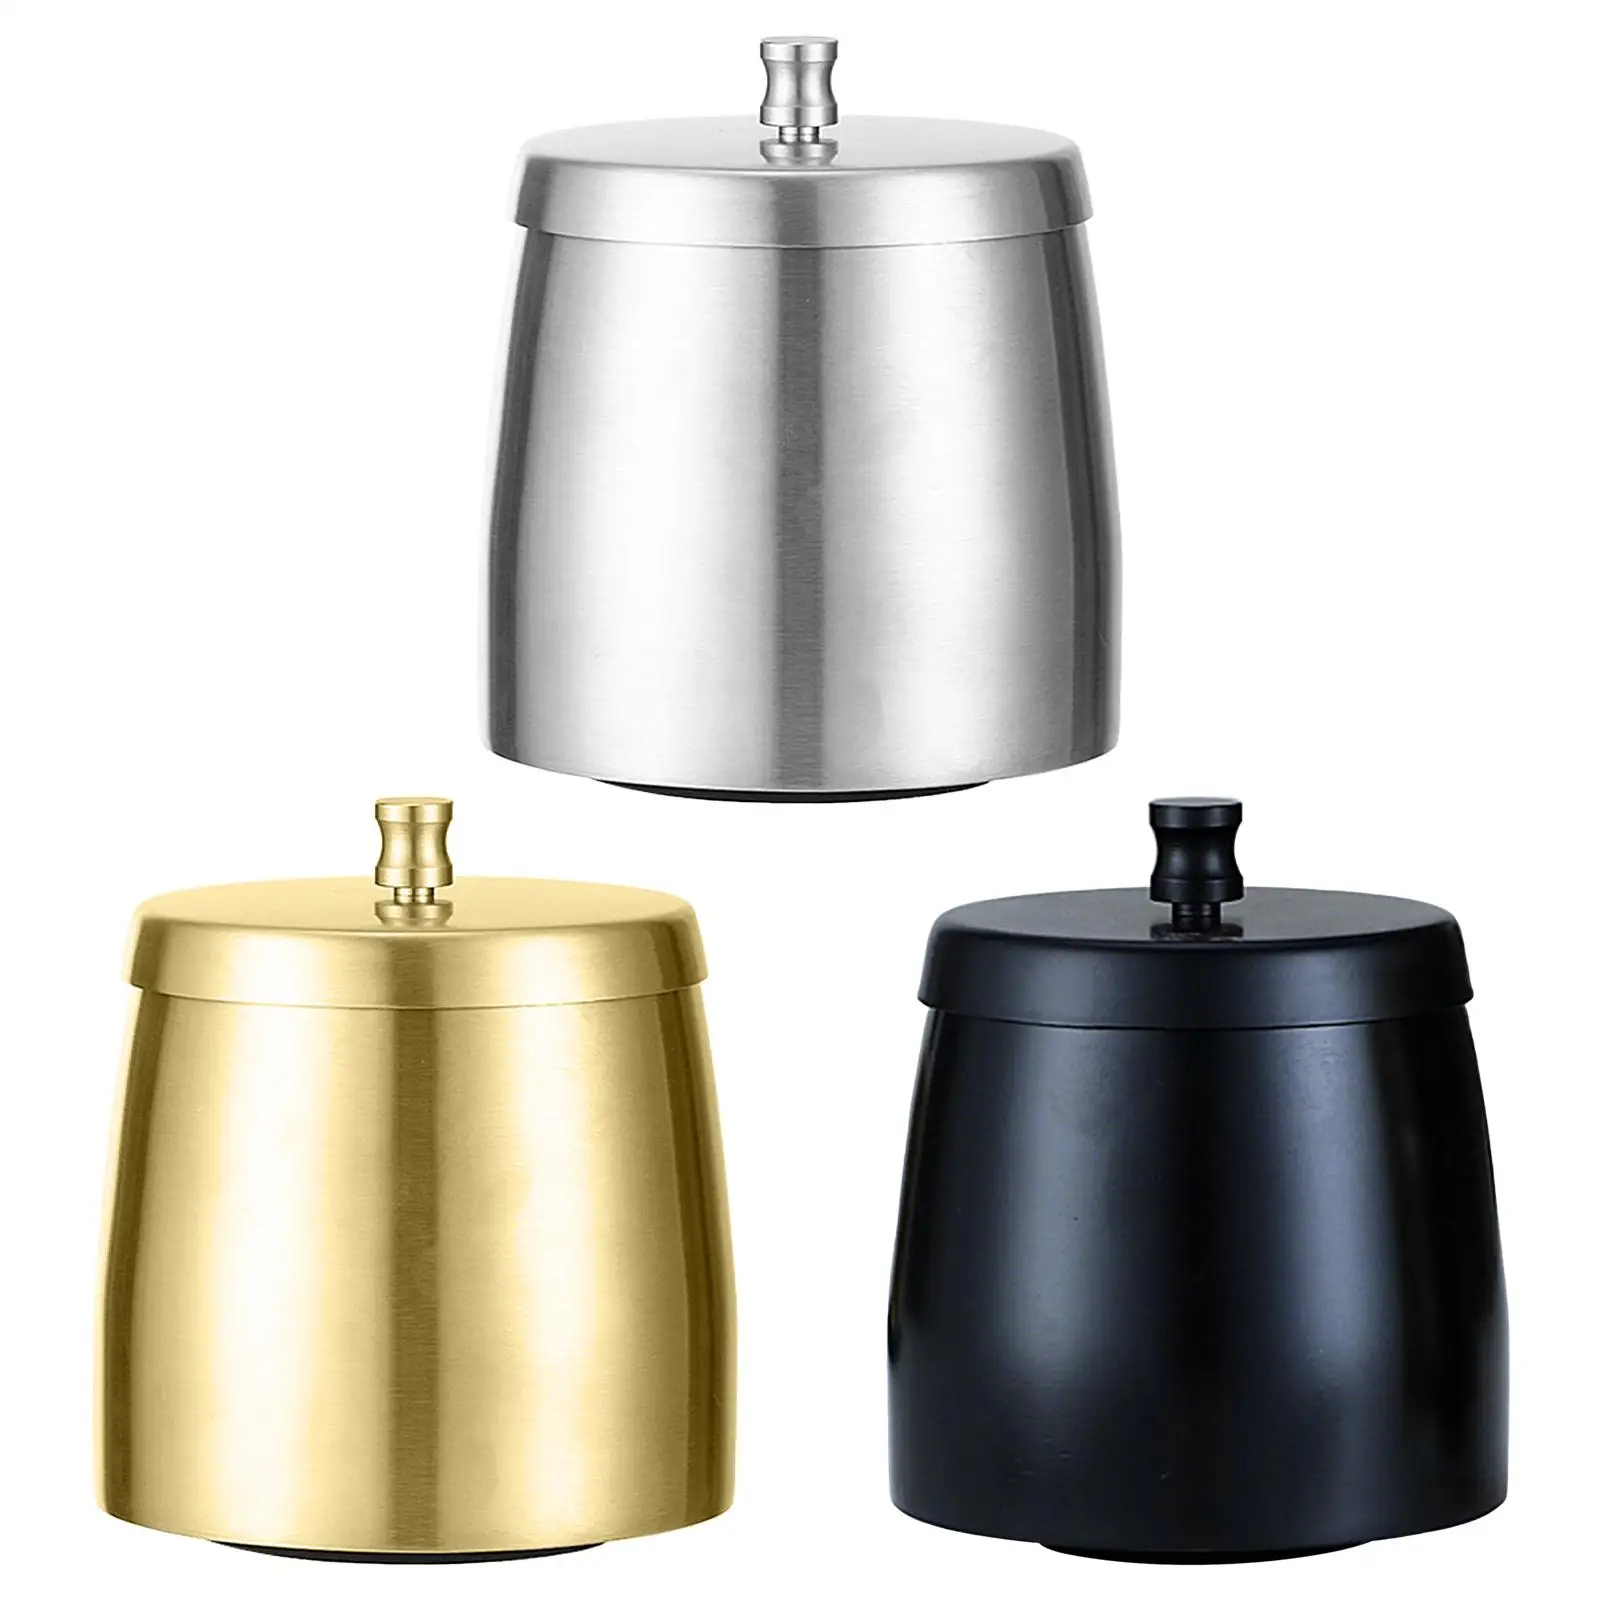 Windproof Ashtray with Lid Stainless Steel Standing Cigarette Ashtray Ash Trays for Office